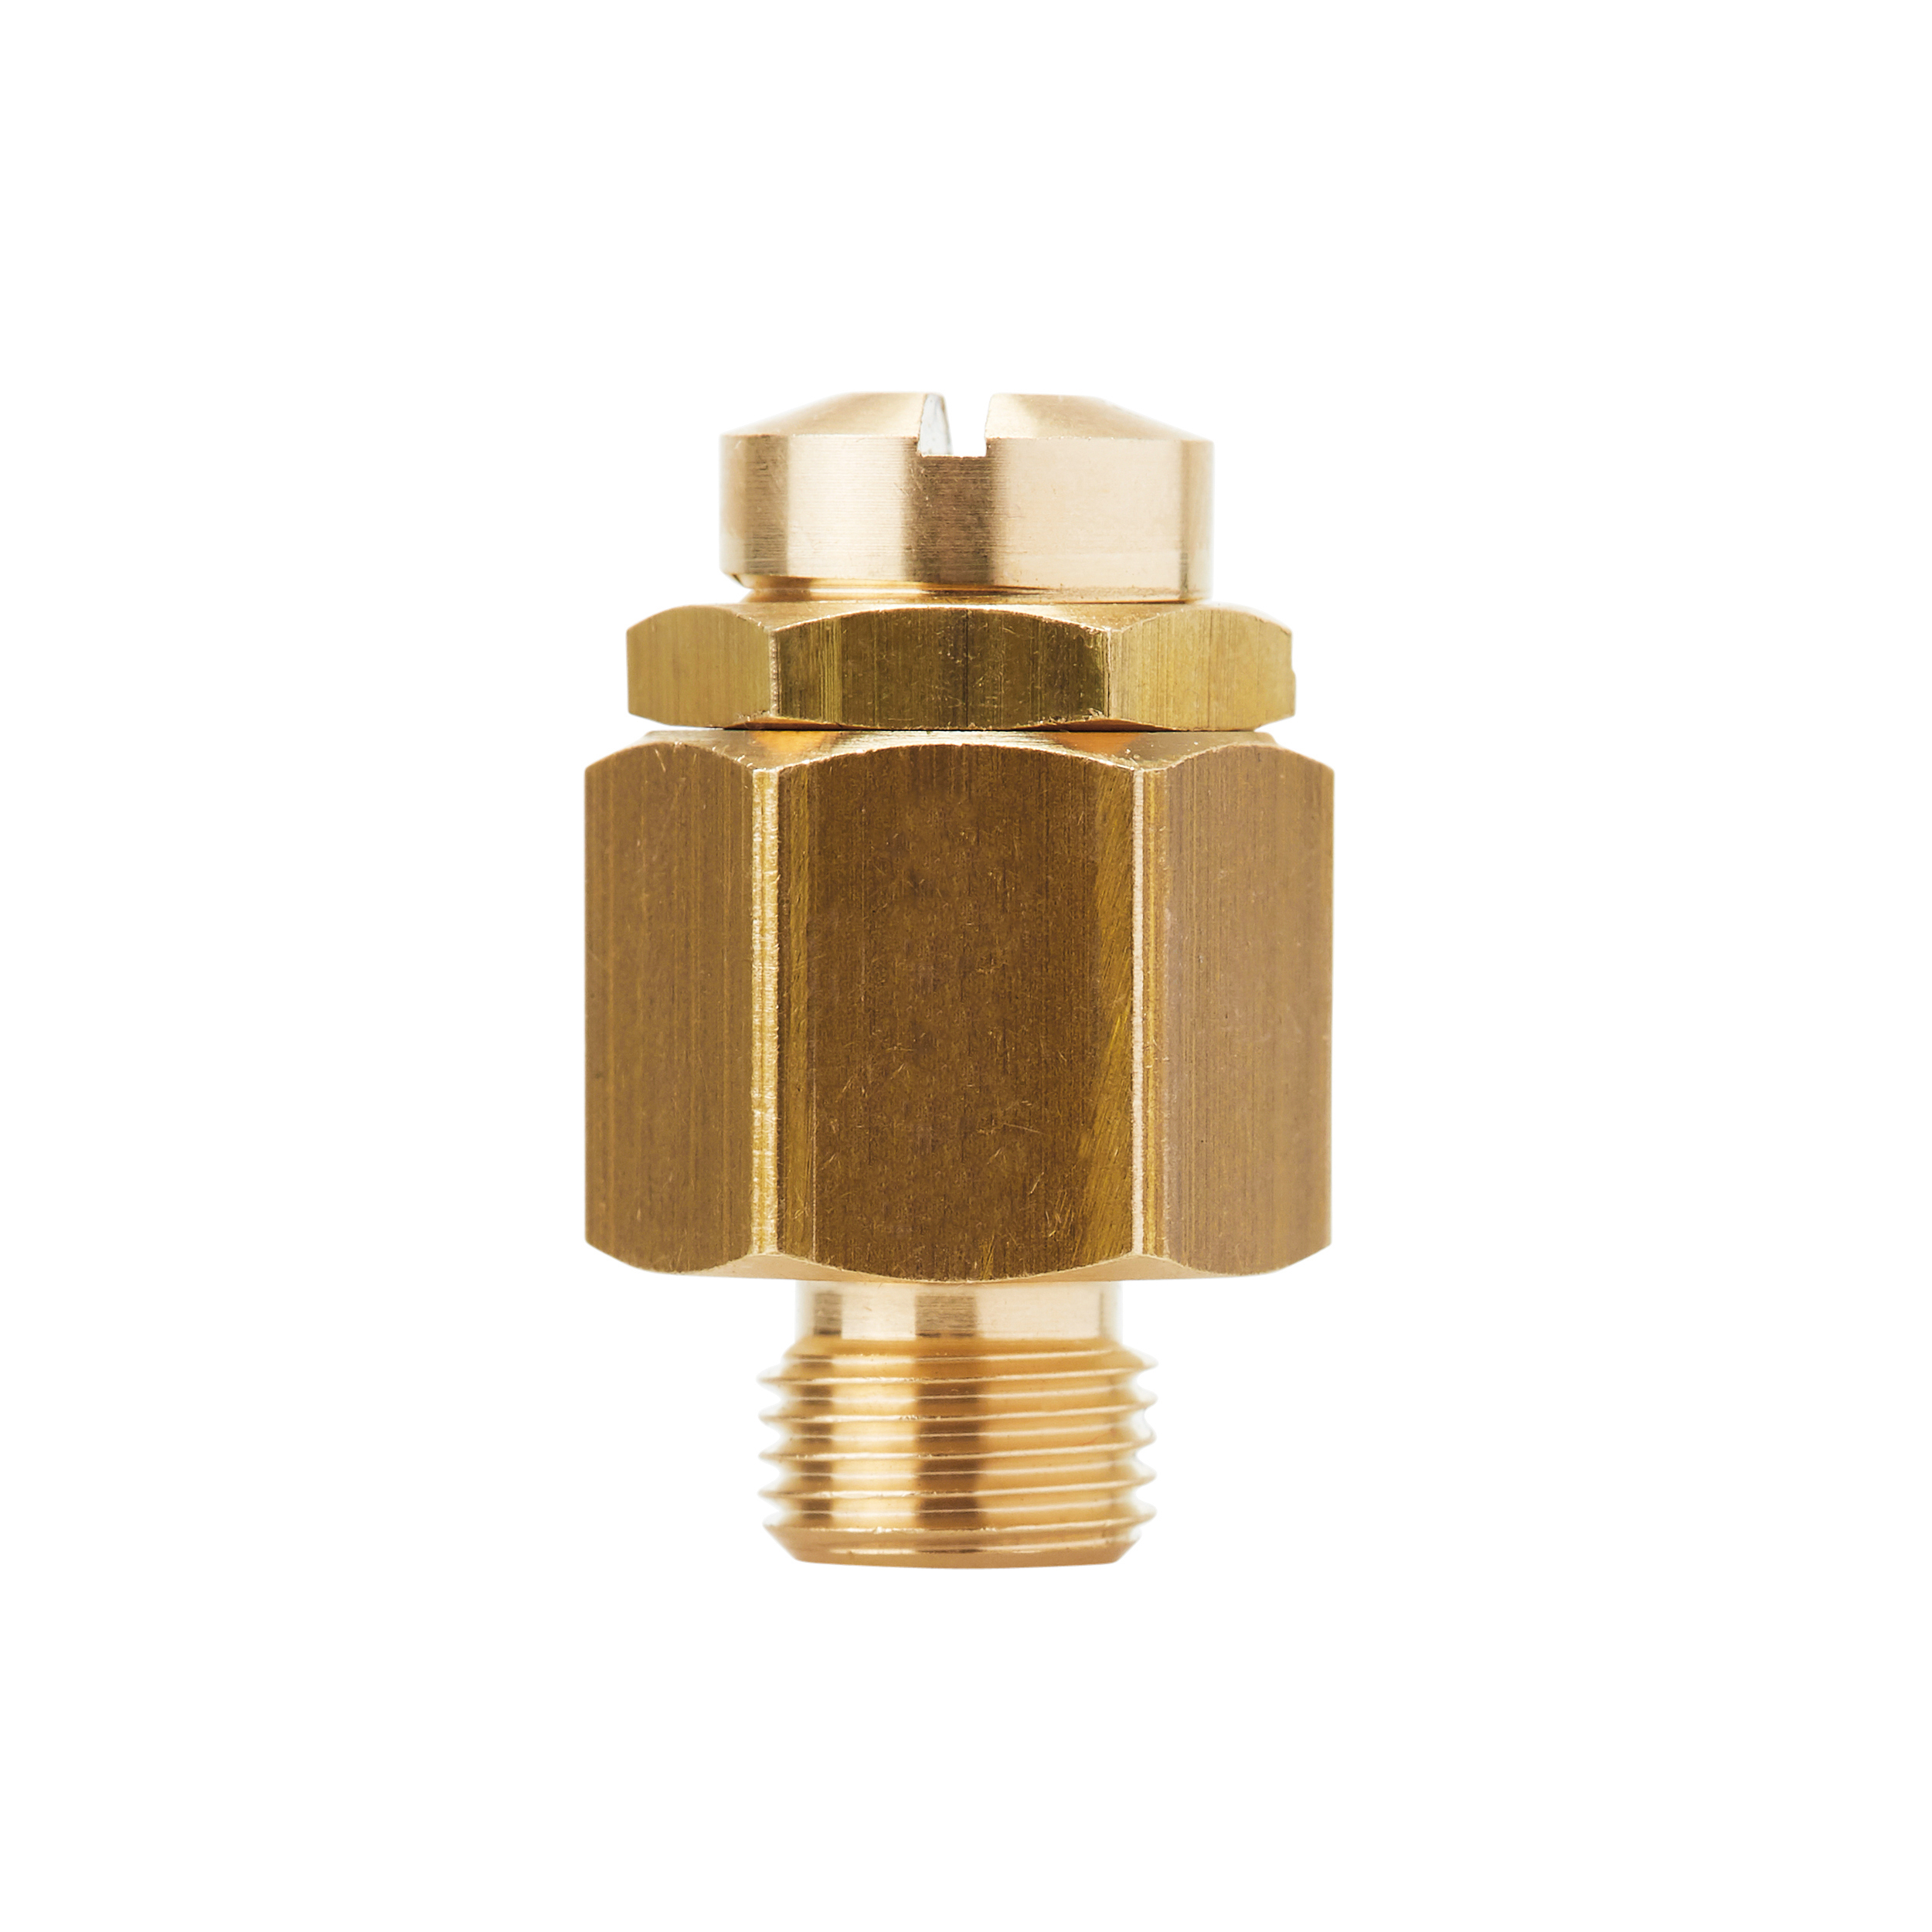 Mini blow-off valve DN 3, G ¼, set pressure: 45.5 bar (660 psi), NBR-seal, not component tested